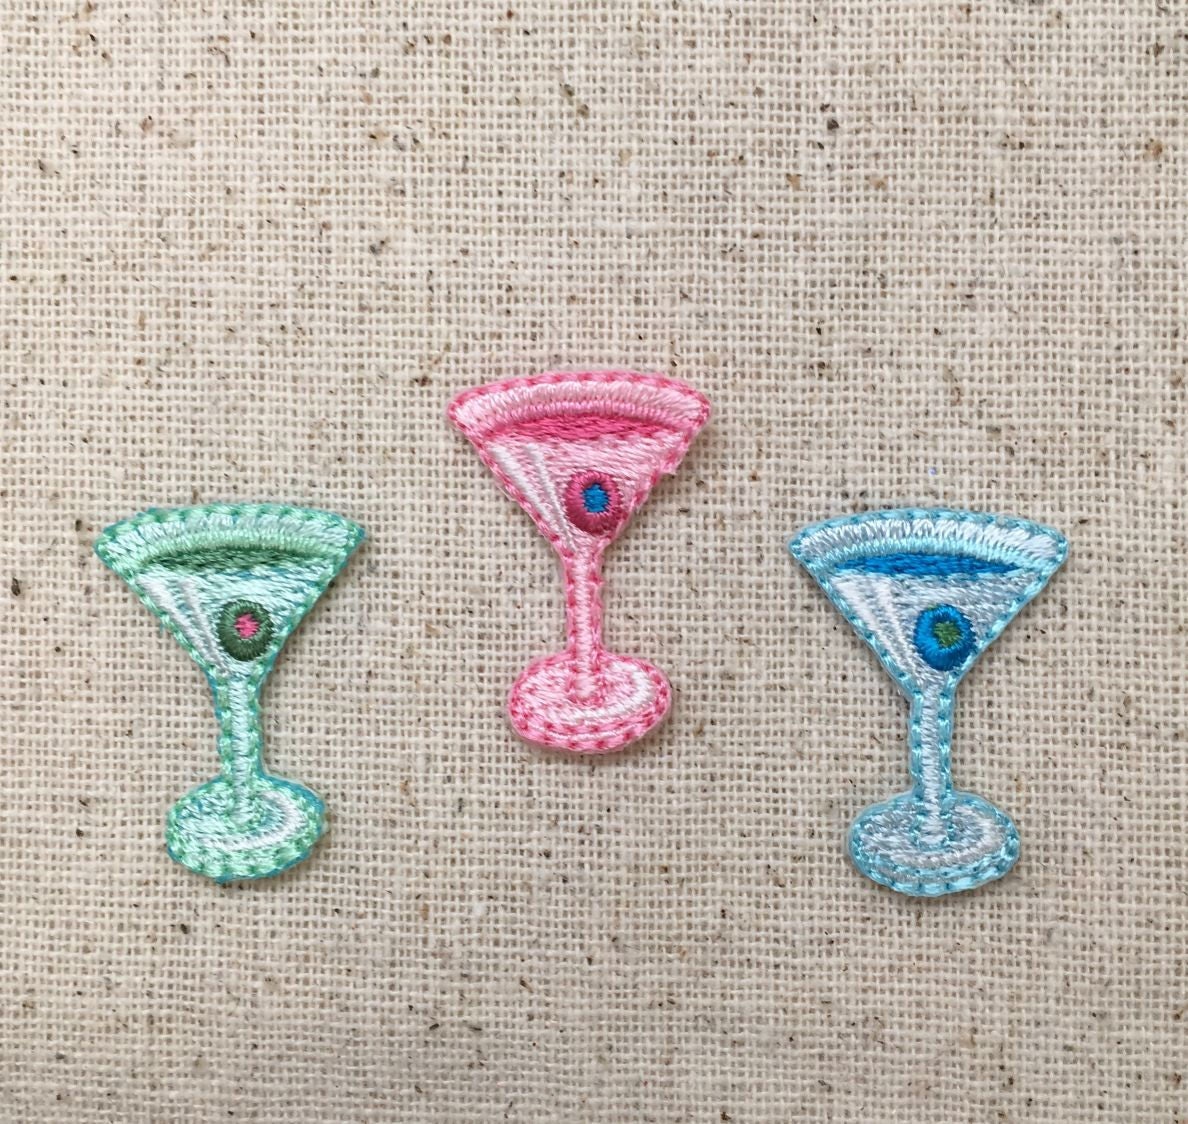 Small/Mini - Martini - Cocktail  - Tropical Drink - Color Choice: Green, Pink, or Blue - Iron on Applique - Embroidered Patch